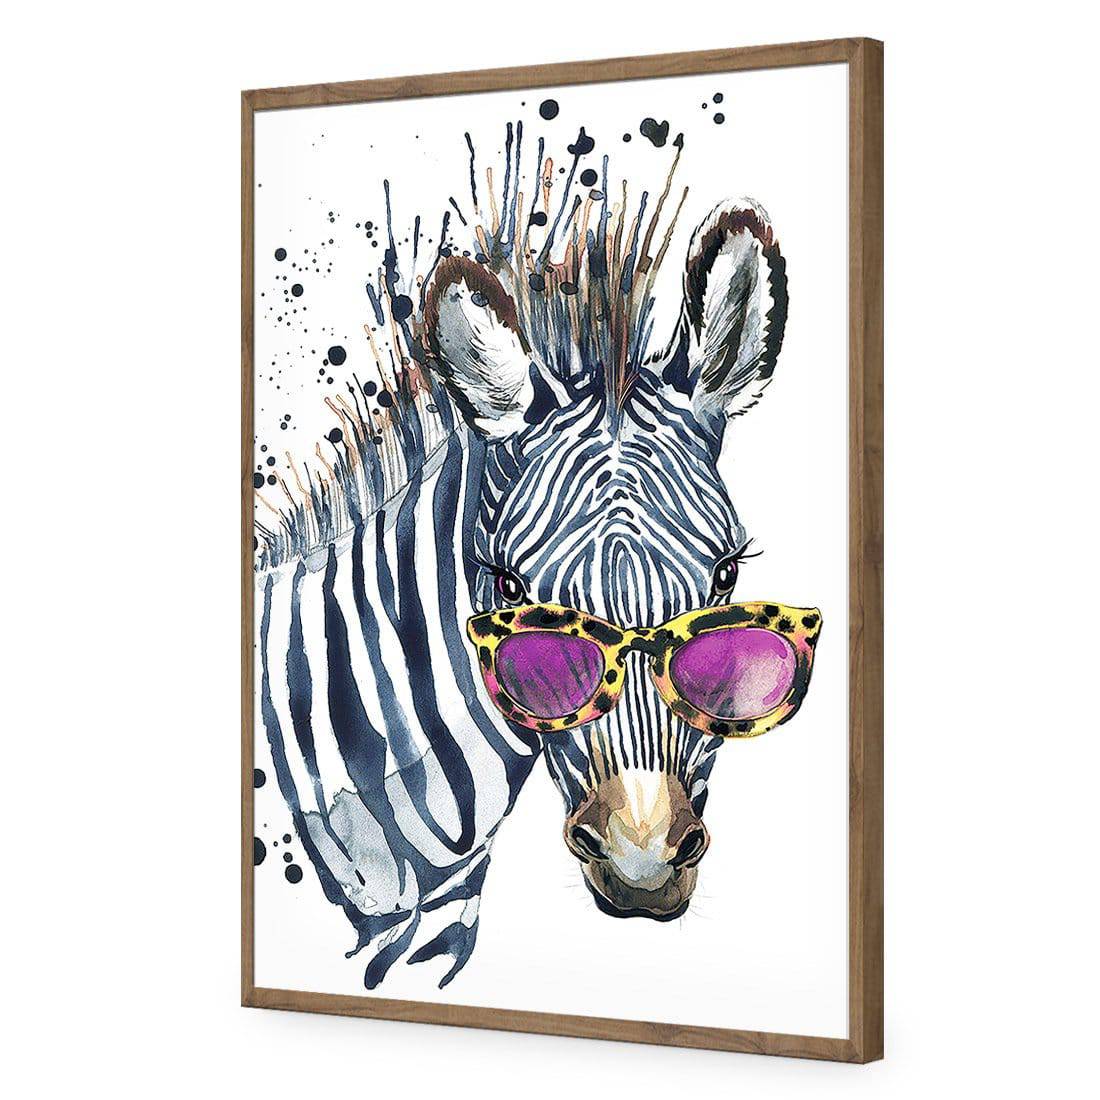 Cool Zebra-Acrylic-Wall Art Design-Without Border-Acrylic - Natural Frame-45x30cm-Wall Art Designs